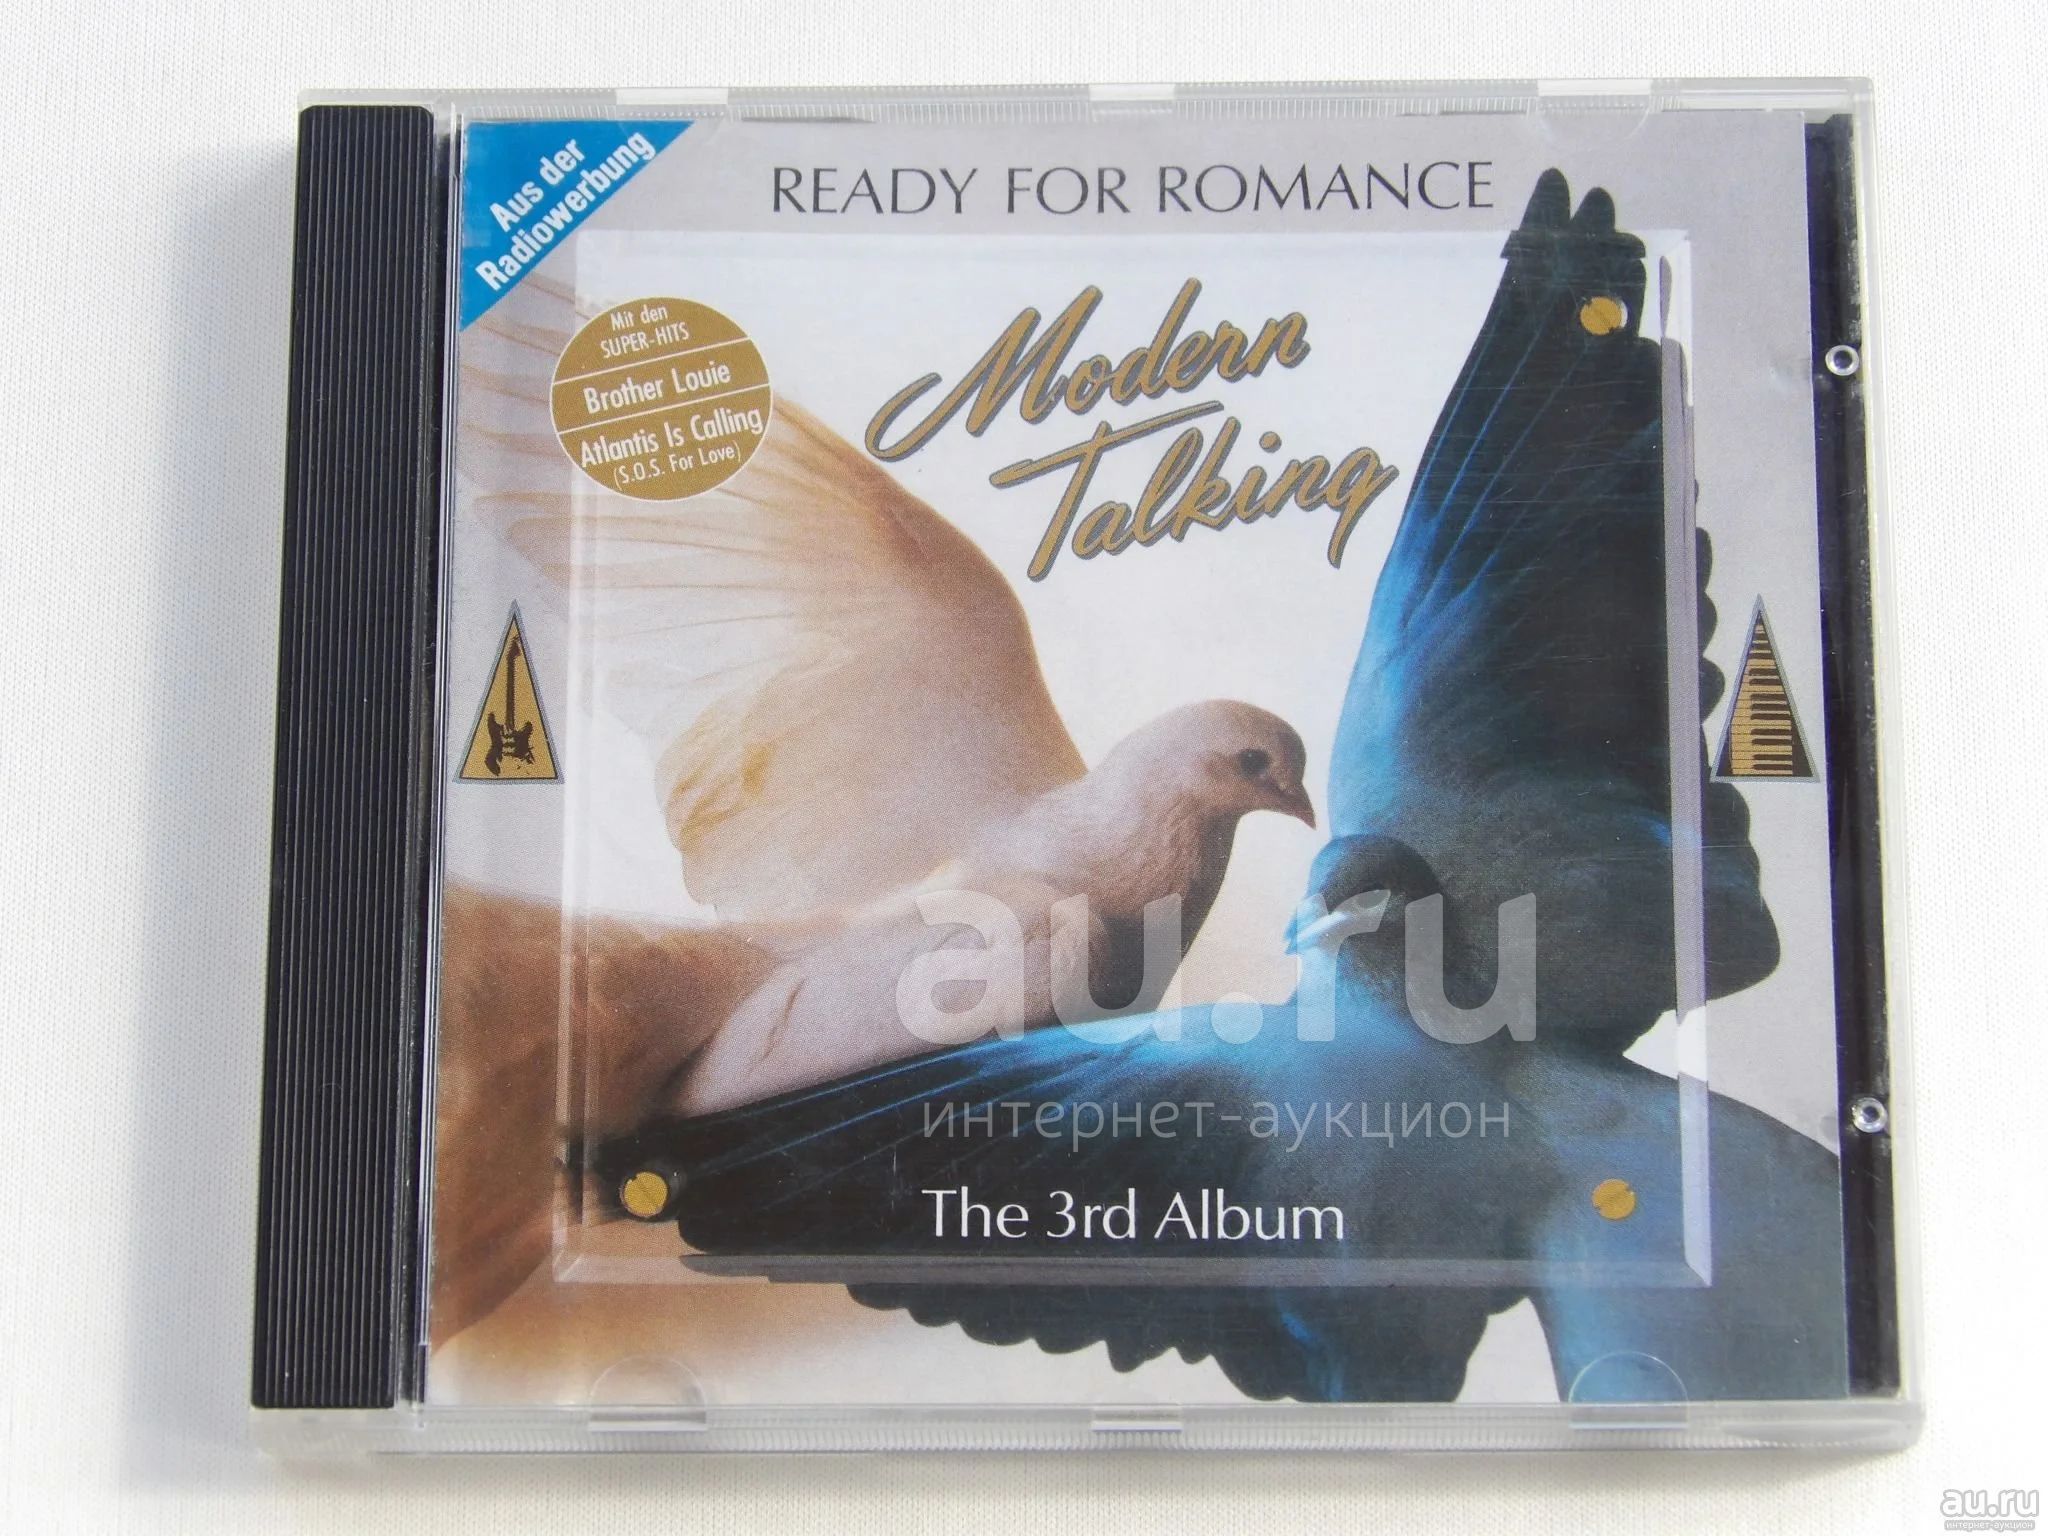 Ready for romance. Modern talking ready for Romance 1986. Ready for Romance альбом. Modern talking ready for Romance. Ready for Romance - the 3rd album.